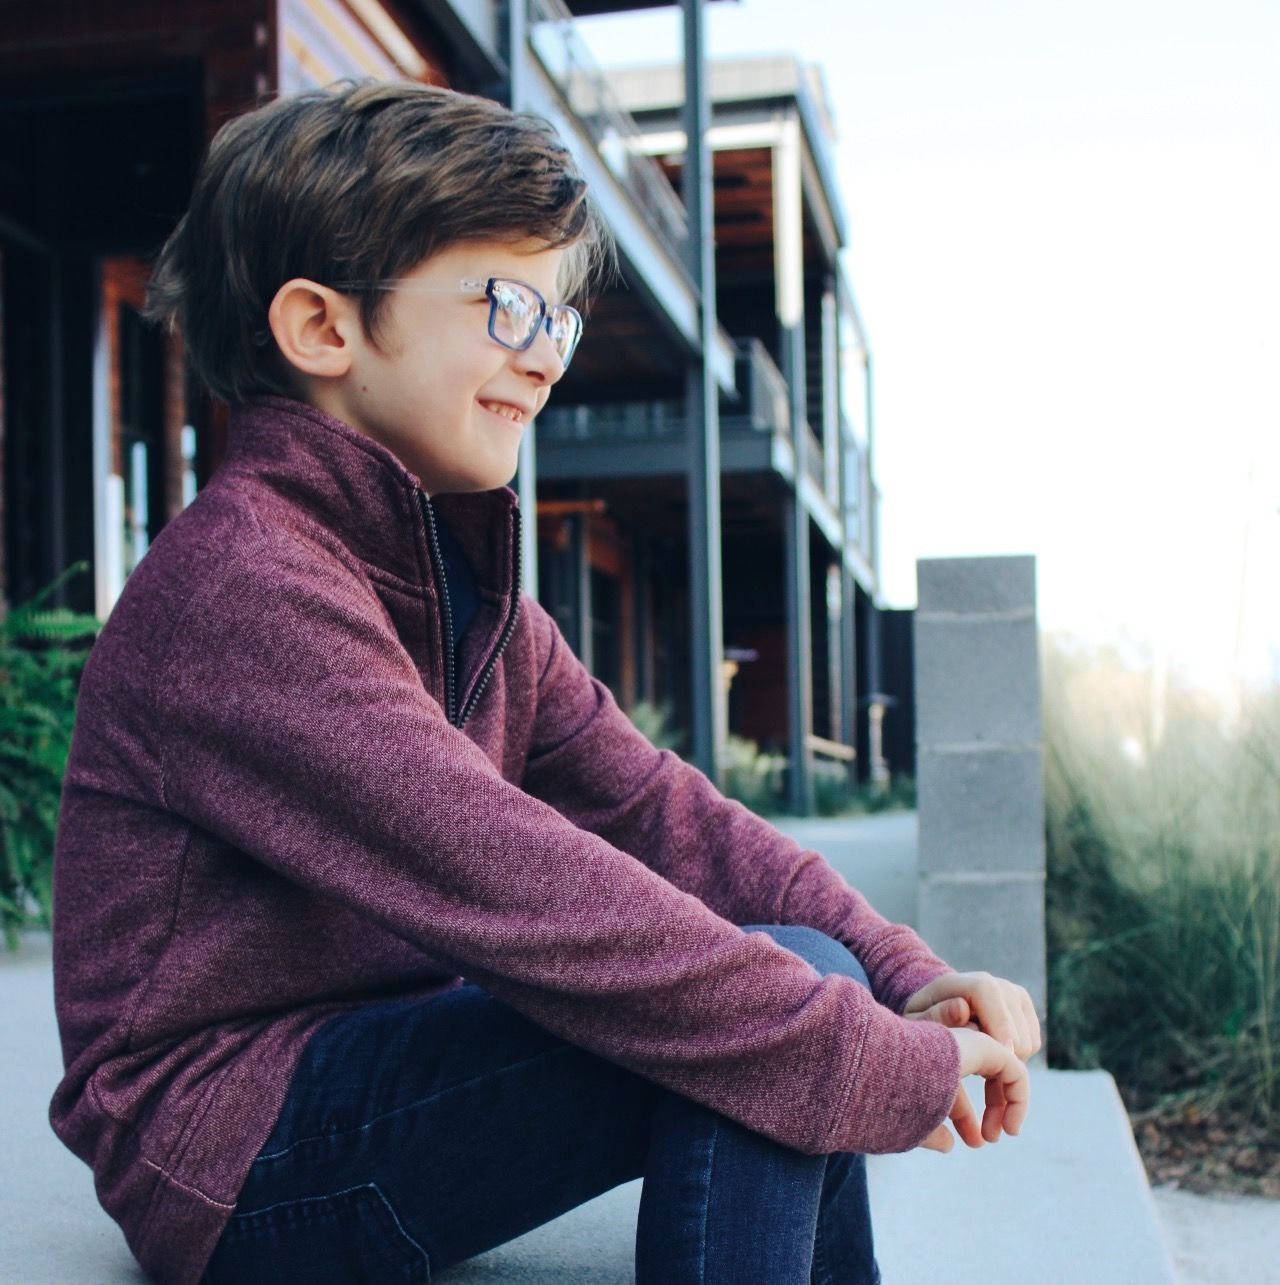 exterior CustomEyes boutique eyewear and optician, young boy wearing glasses and looking off into distance your child's vision needs